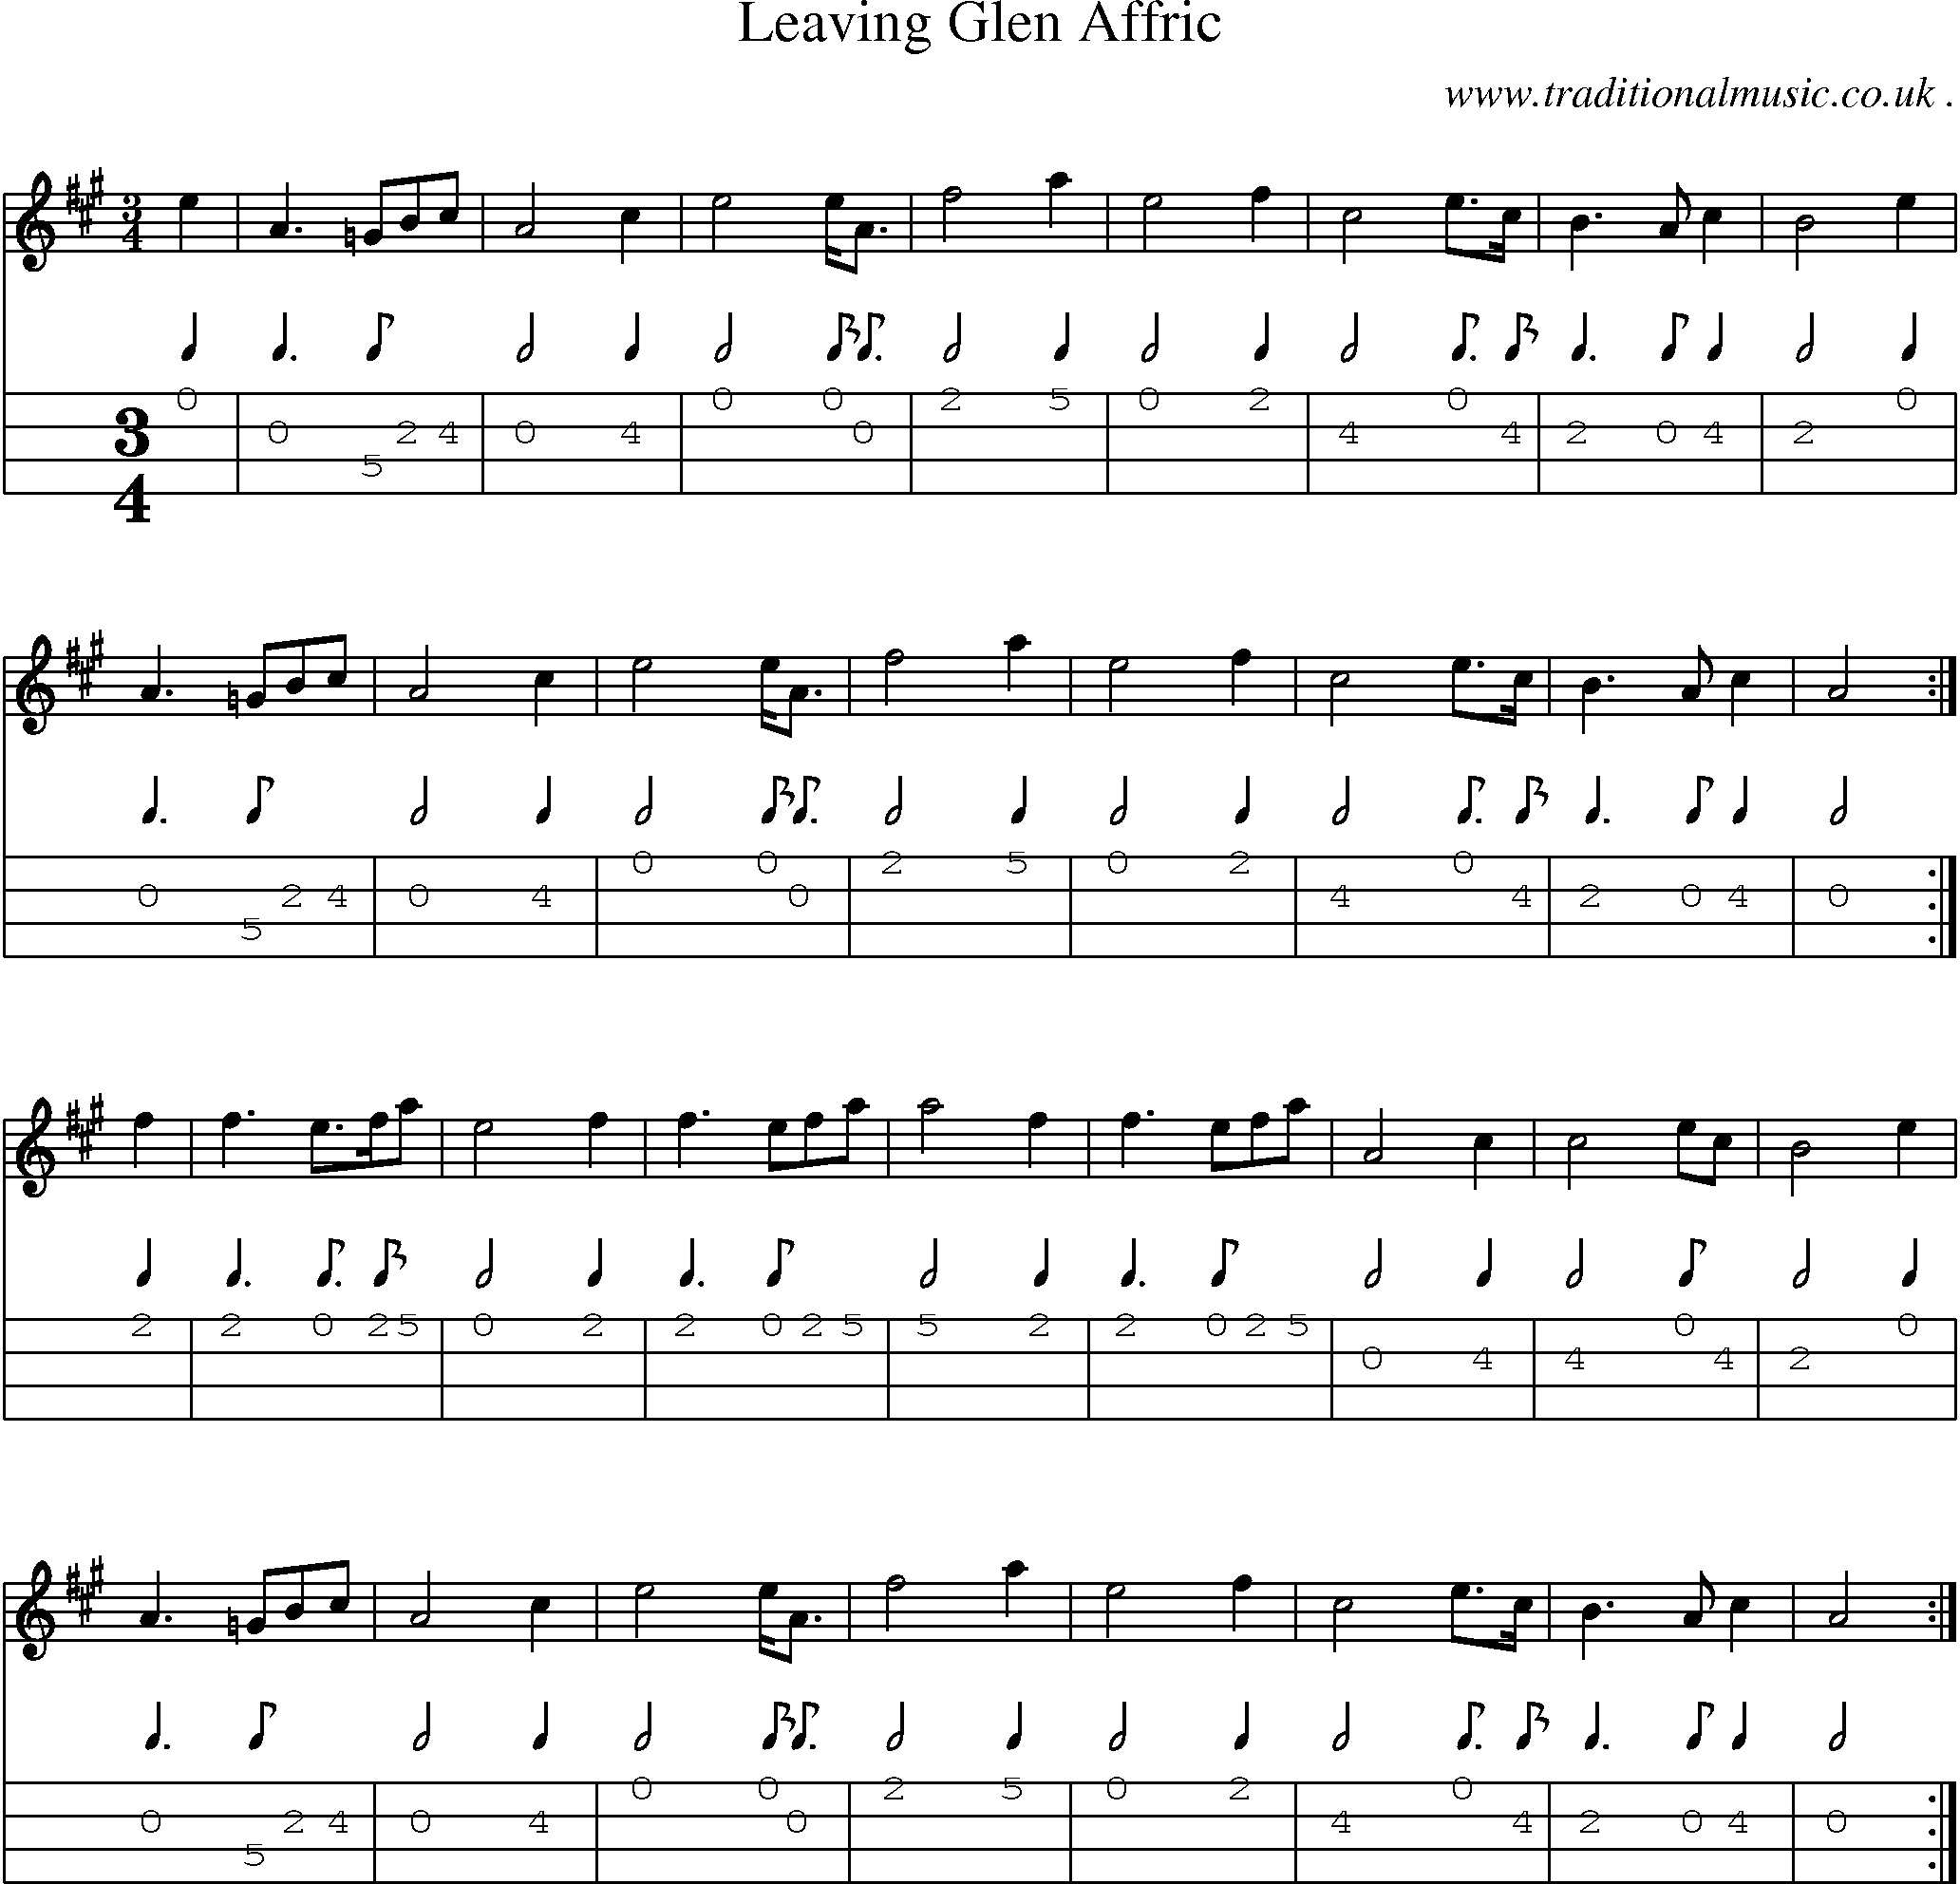 Sheet-music  score, Chords and Mandolin Tabs for Leaving Glen Affric